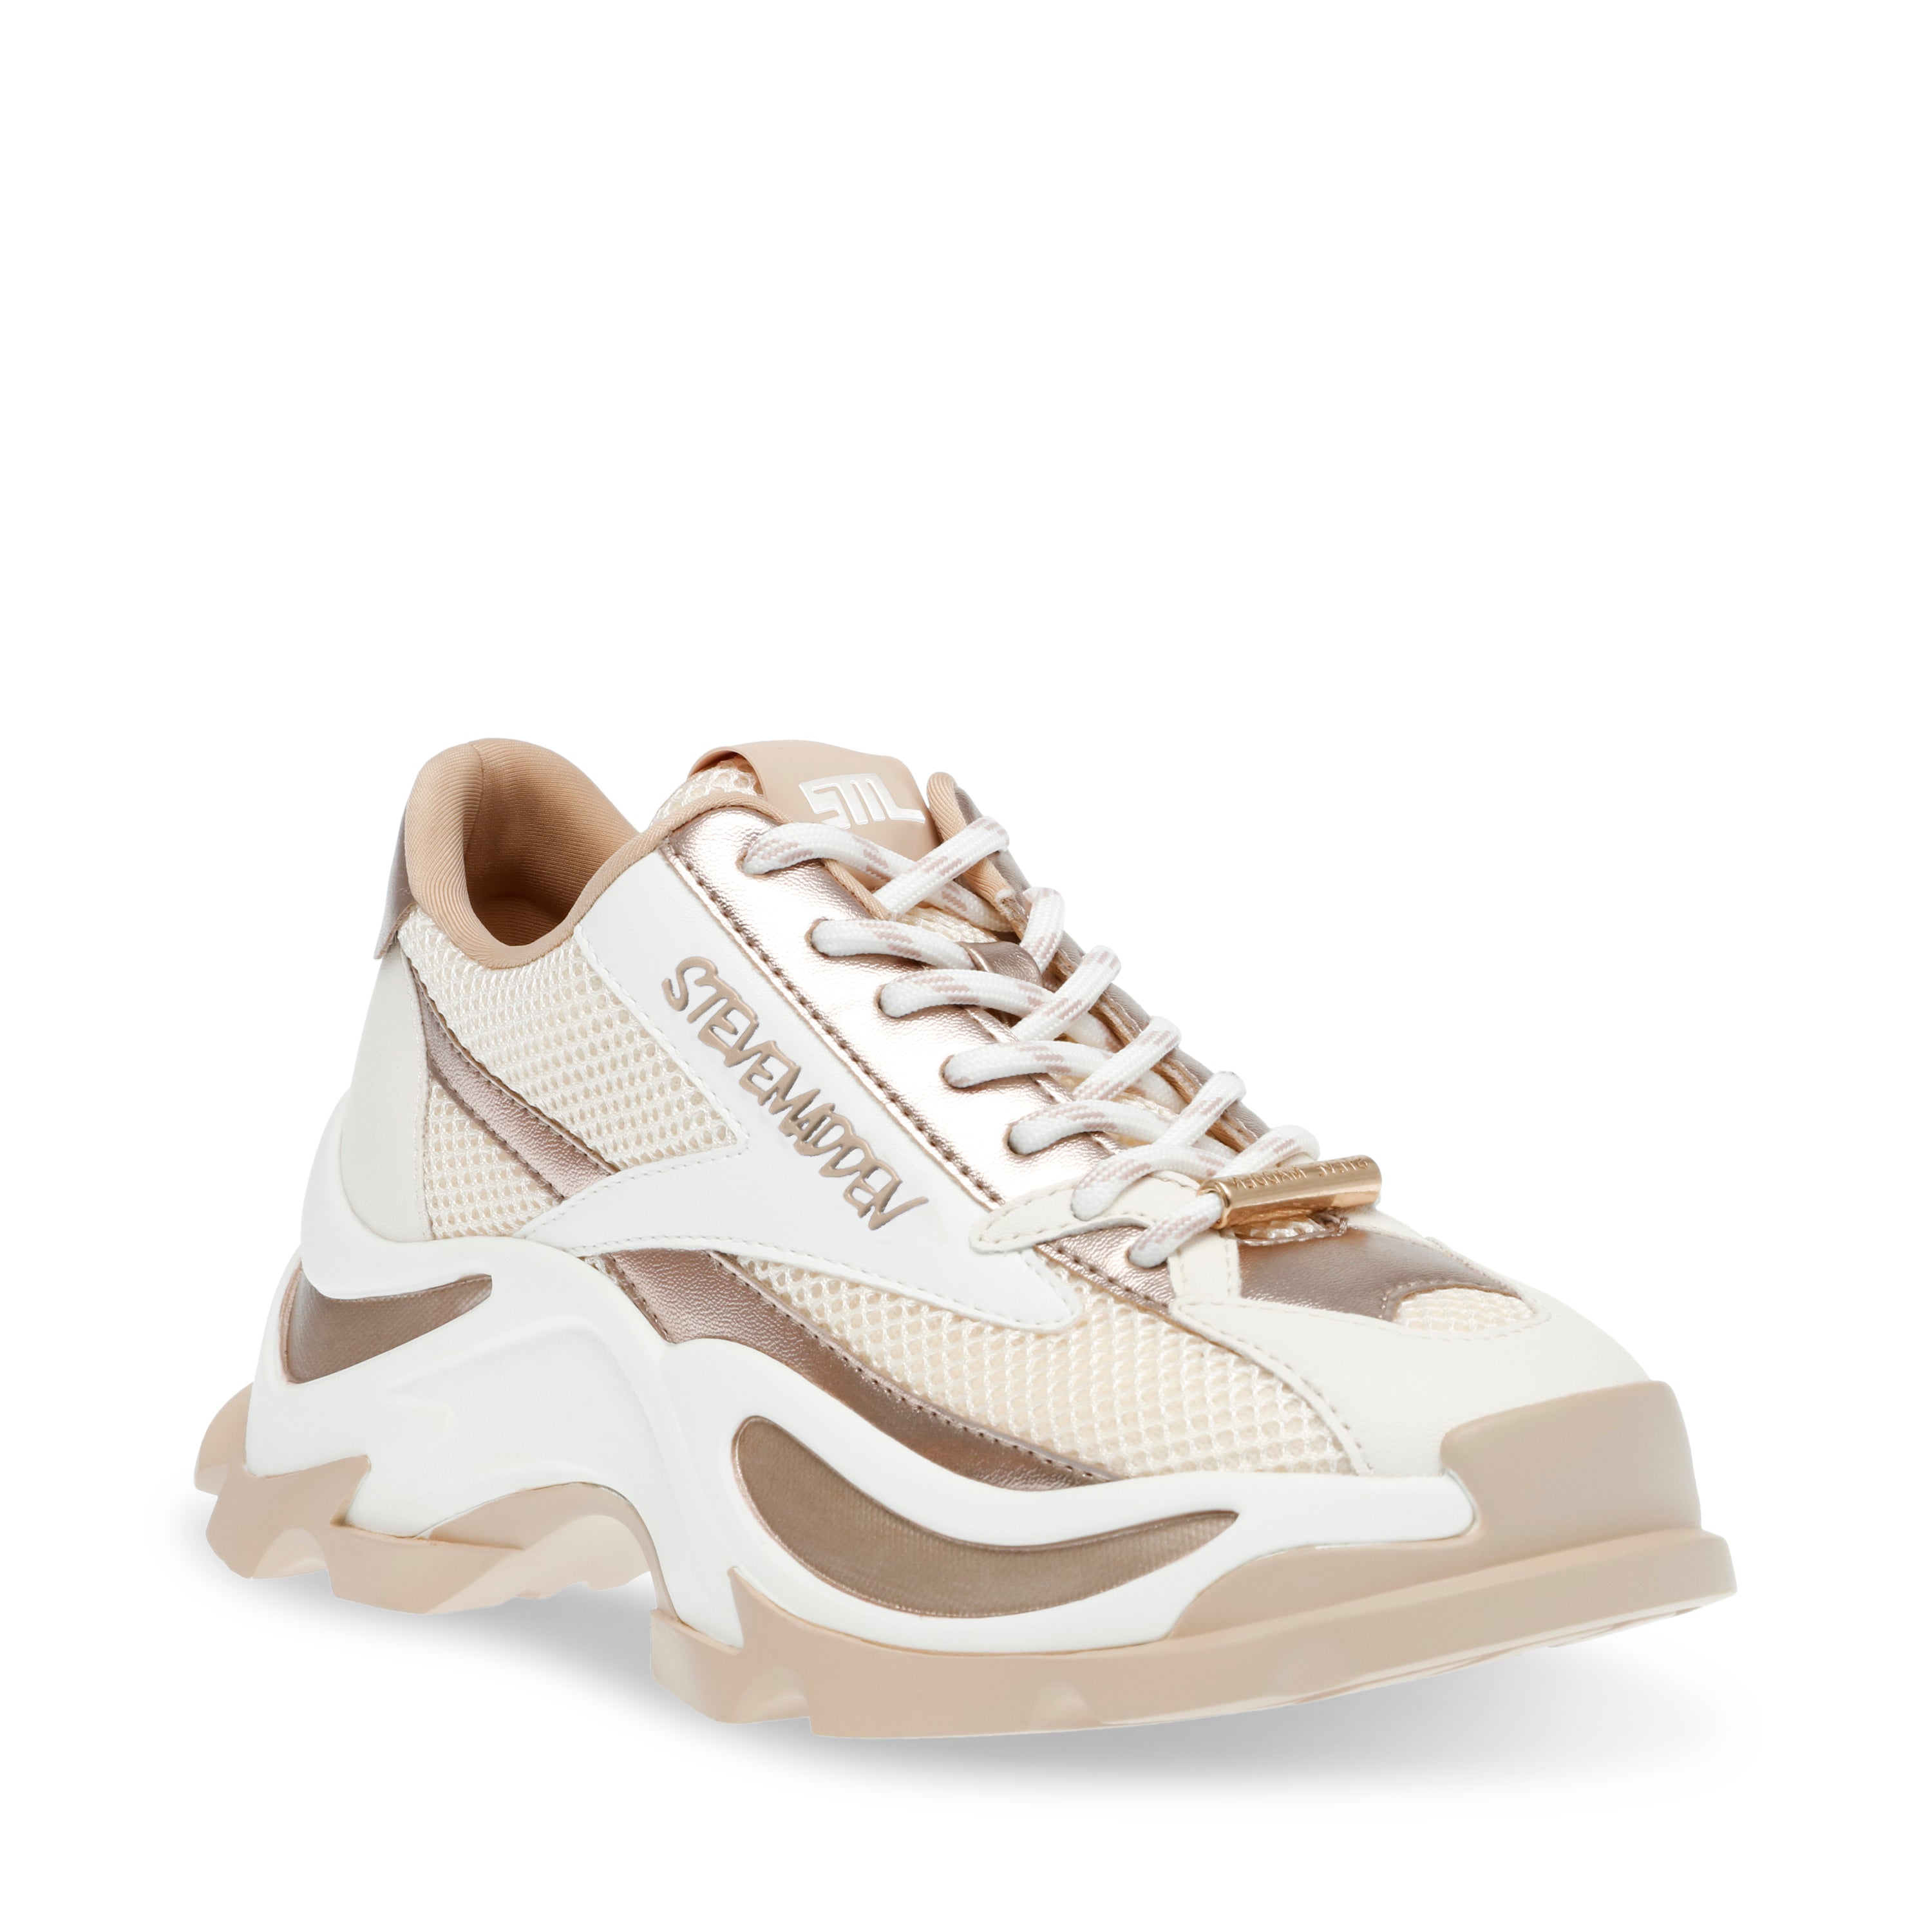 Zoomz Sneaker Cream Rose Gold- Hover Image